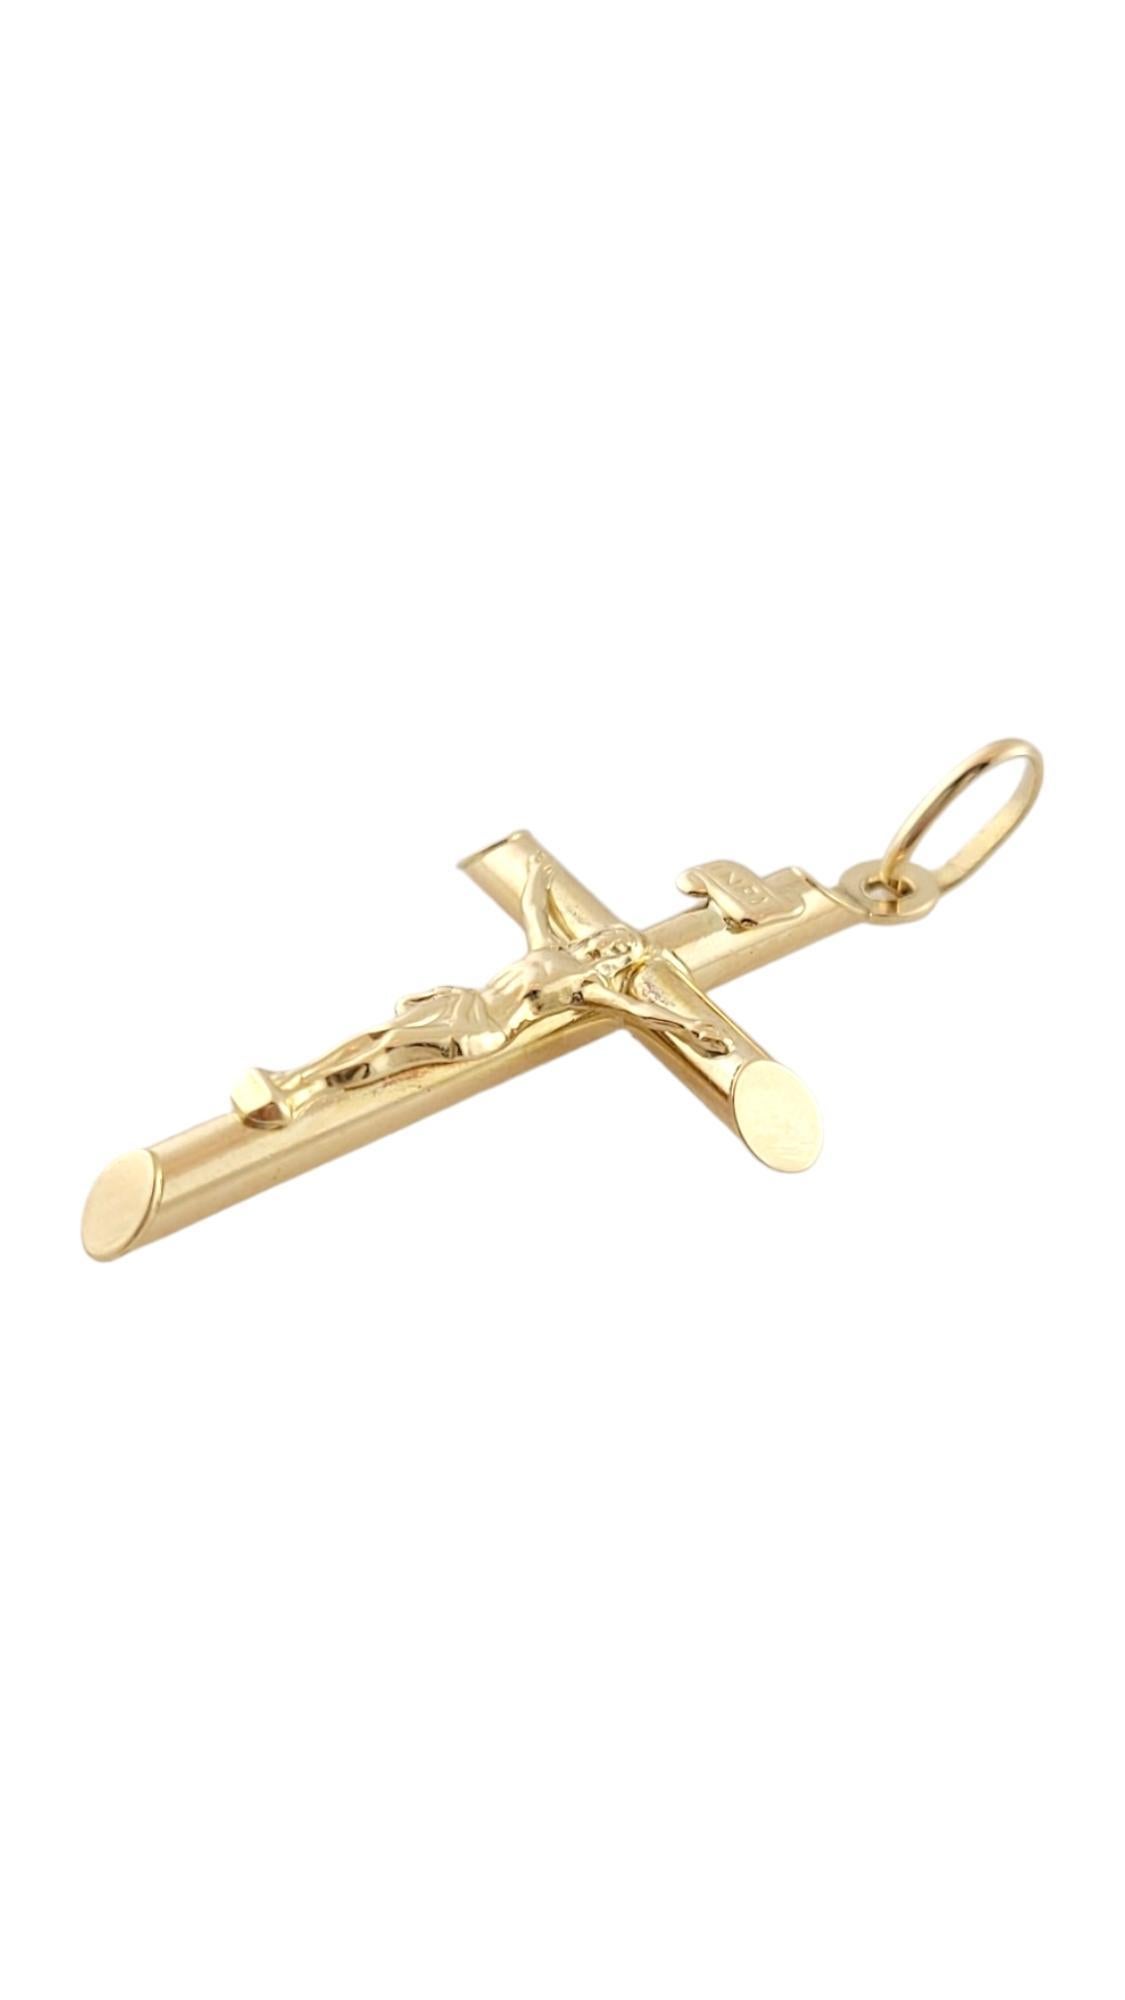 Vintage 14K Yellow Gold Crucifix Pendant

This gorgeous cross pendant is crafted with amazing detail from 14K yellow gold for a beautiful finish!

Size: 35.05mm X 21.56mm X 3.93mm
Length w/ bail: 41.15mm

Weight: 1.09 dwt/ 1.70 g

Hallmark: Italy